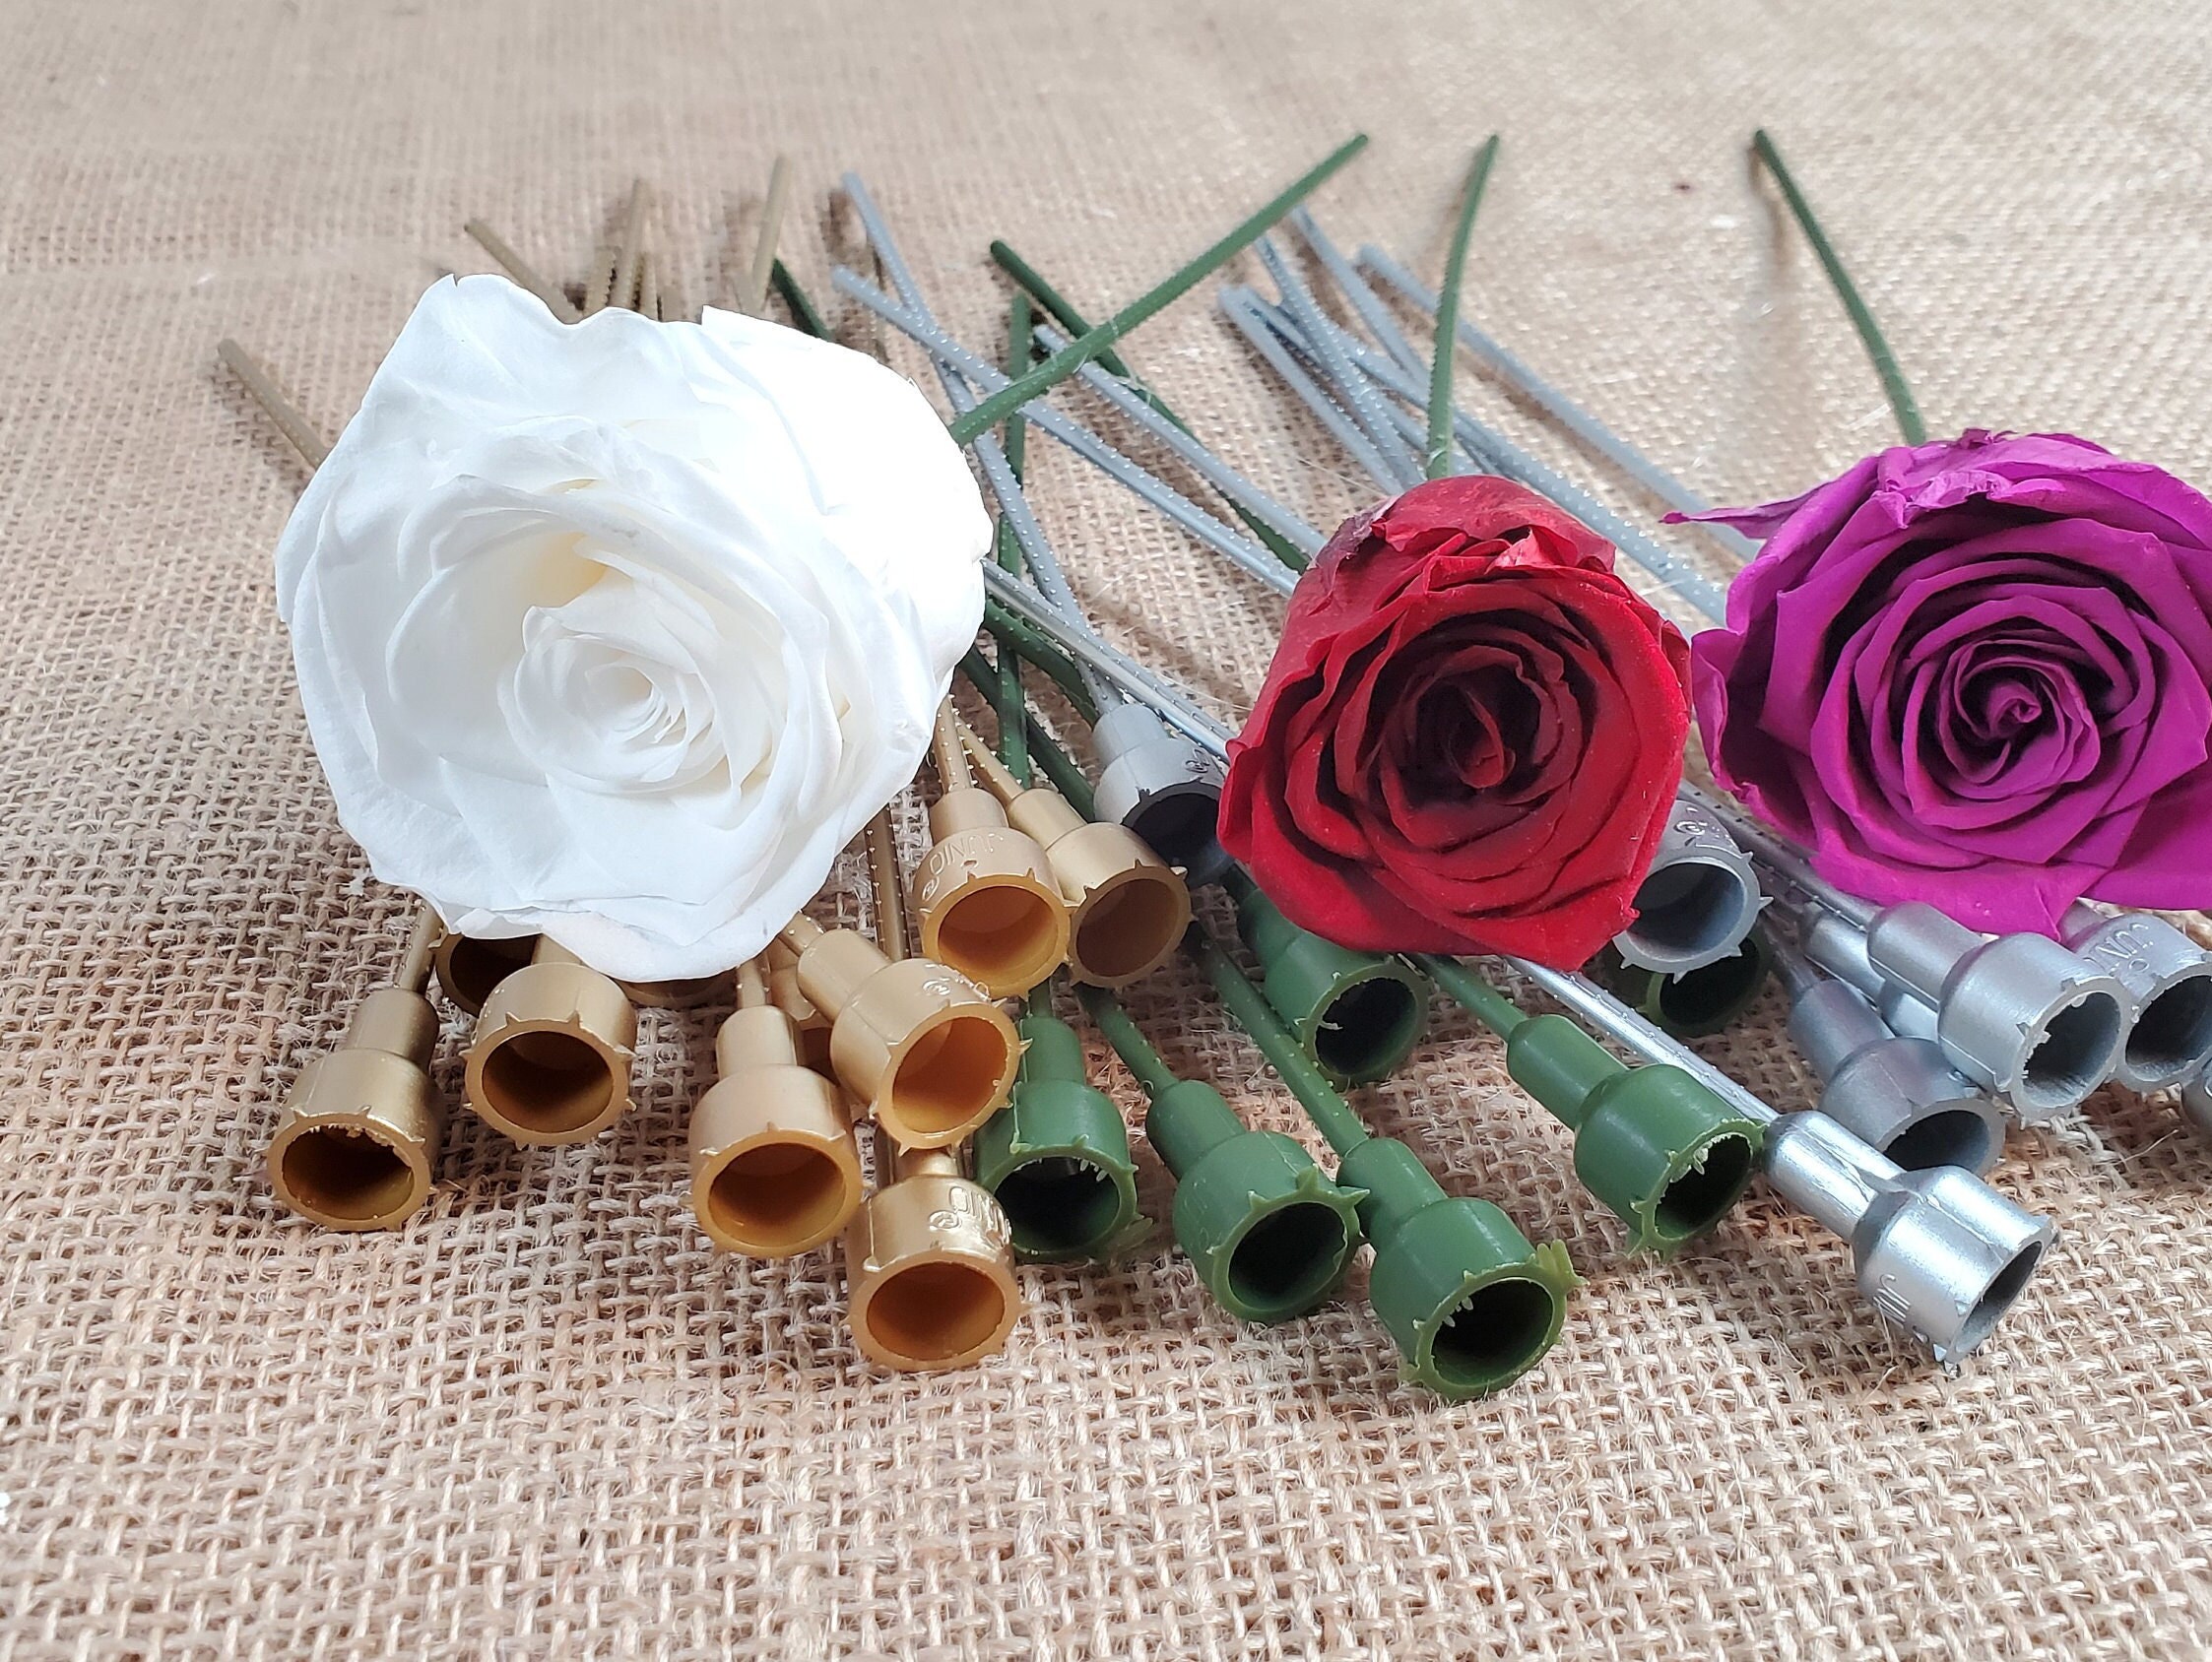 BULK: 25 Artificial Flower Stem Covers With Stems 7-8 Inches Start